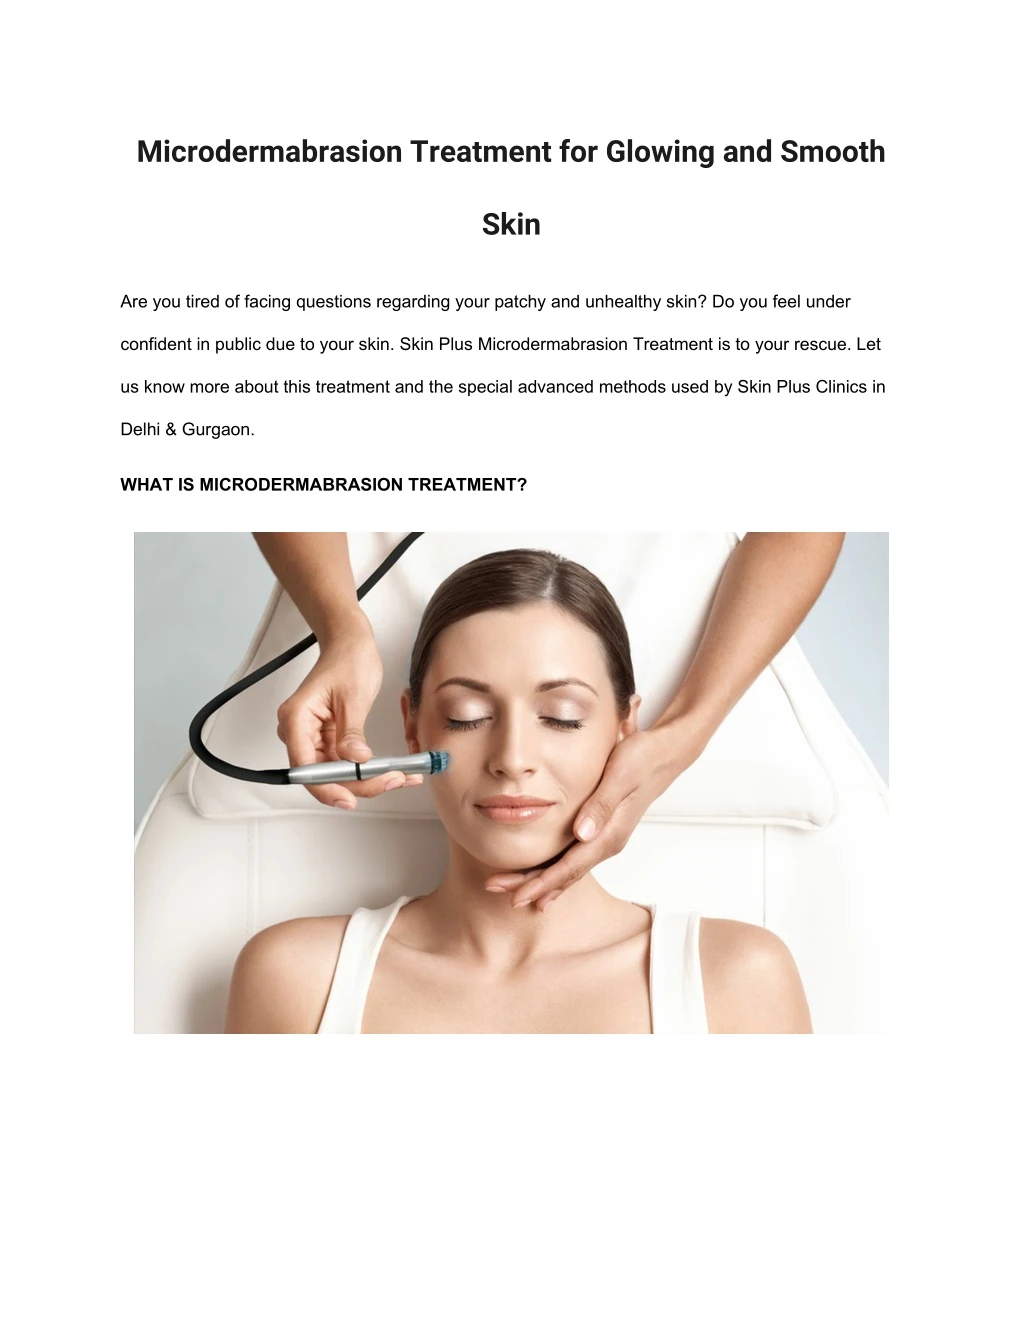 microdermabrasion treatment for glowing and smooth